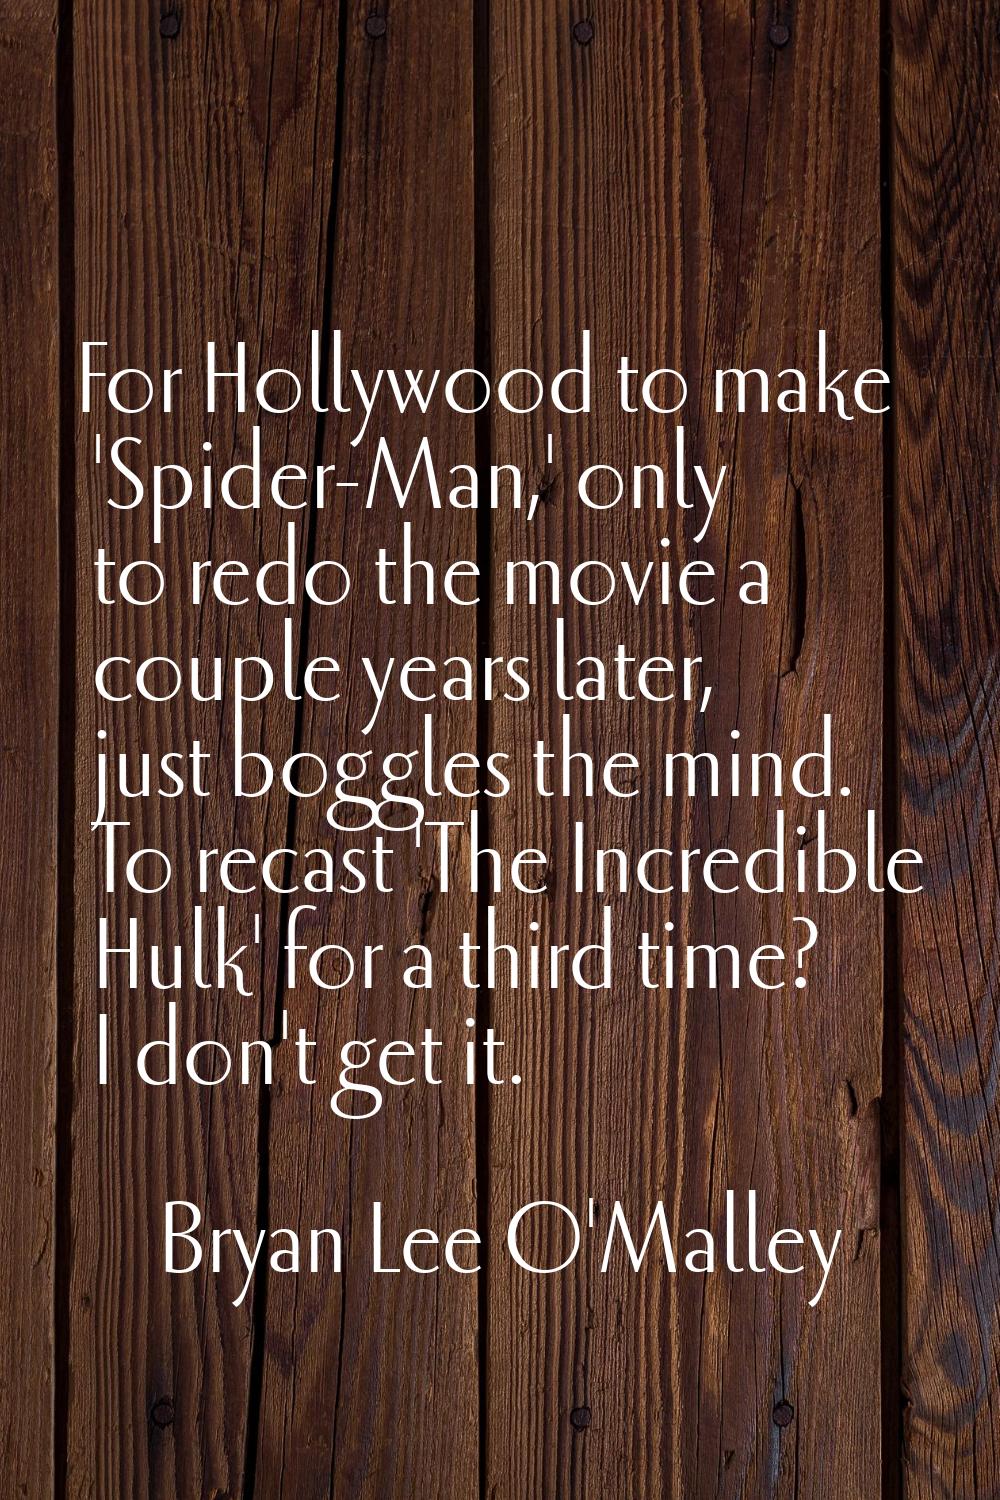 For Hollywood to make 'Spider-Man,' only to redo the movie a couple years later, just boggles the m